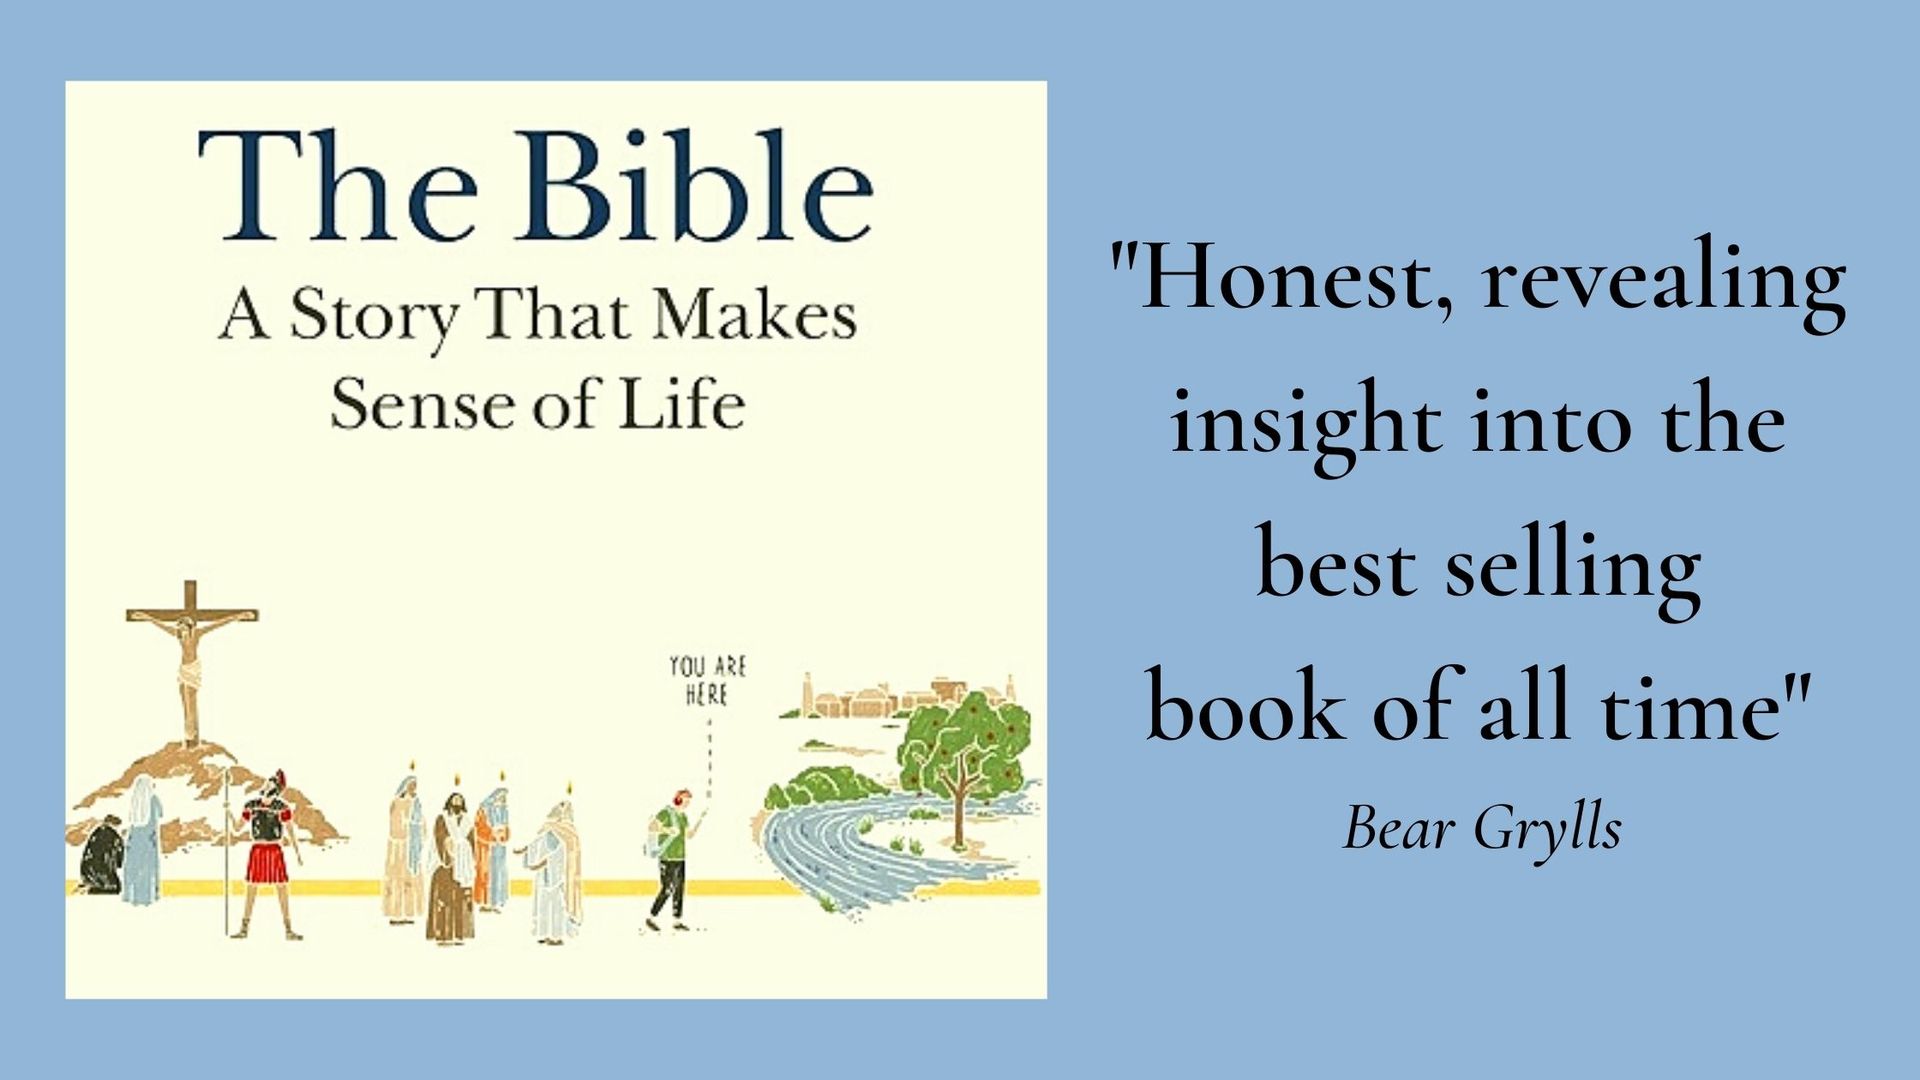 The Bible - A Story That Makes Sense of Life